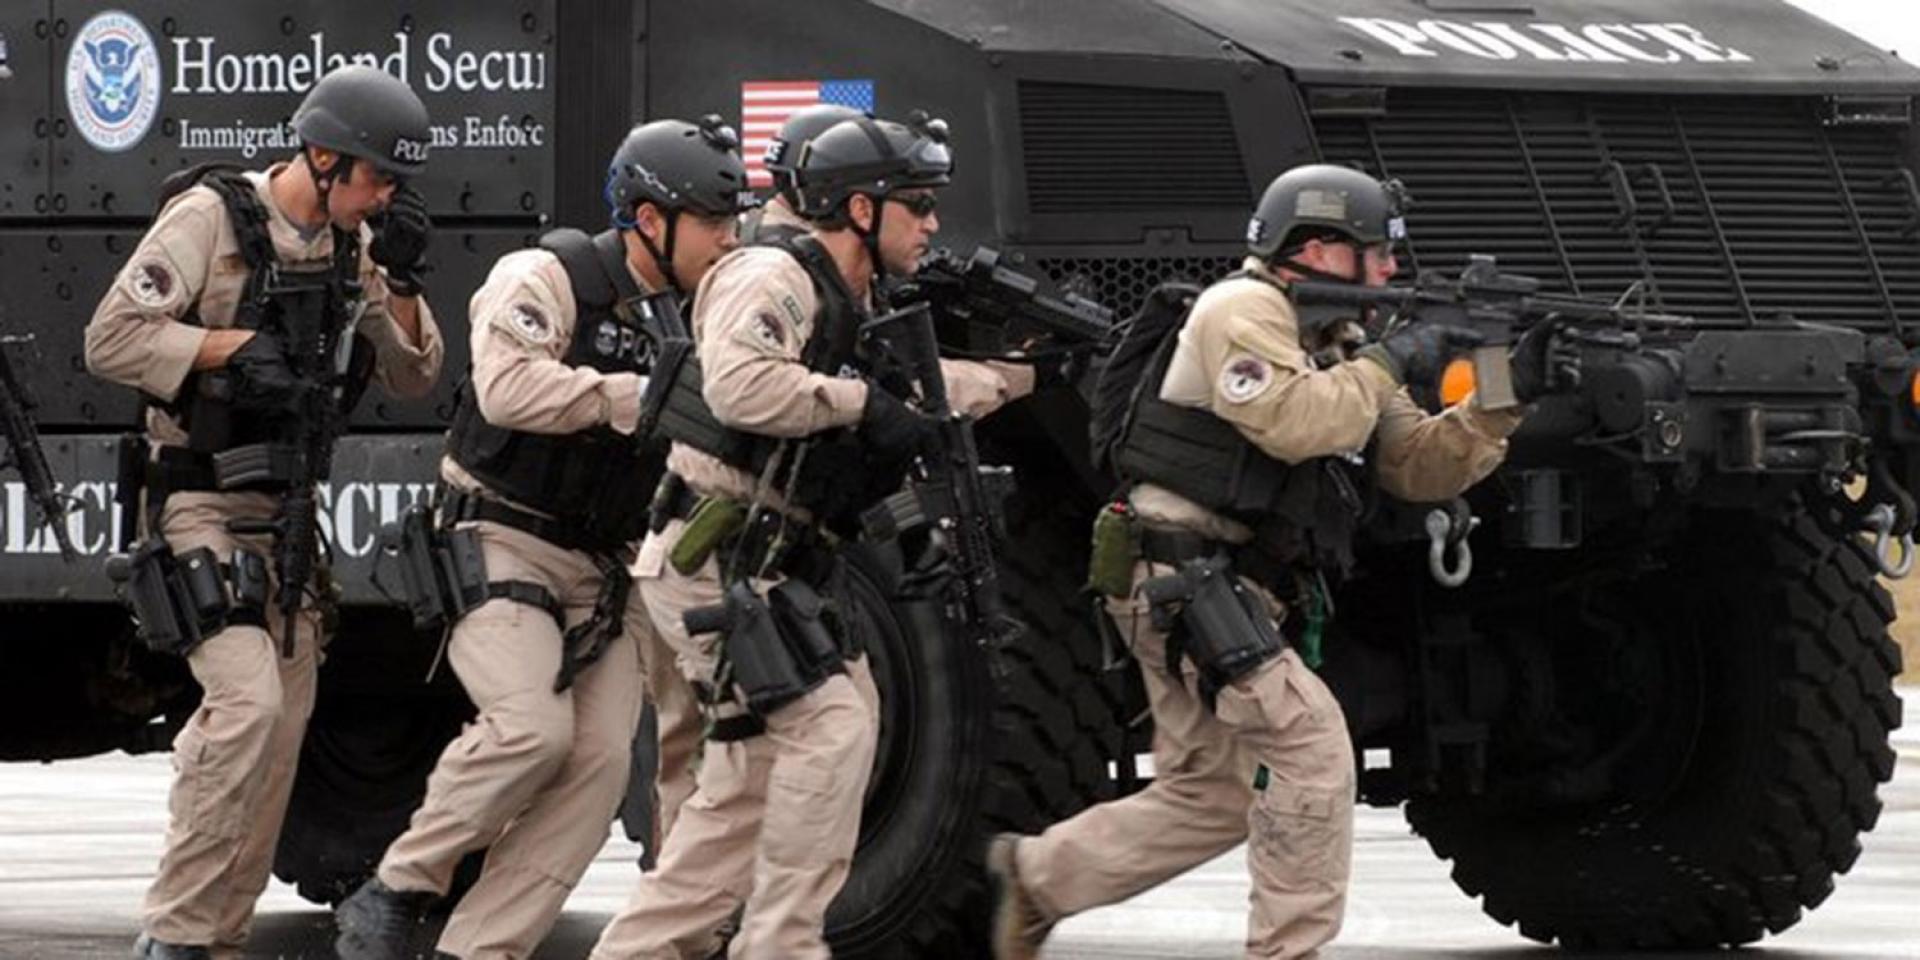 Photo of ICE Police with guns and armored vehicle